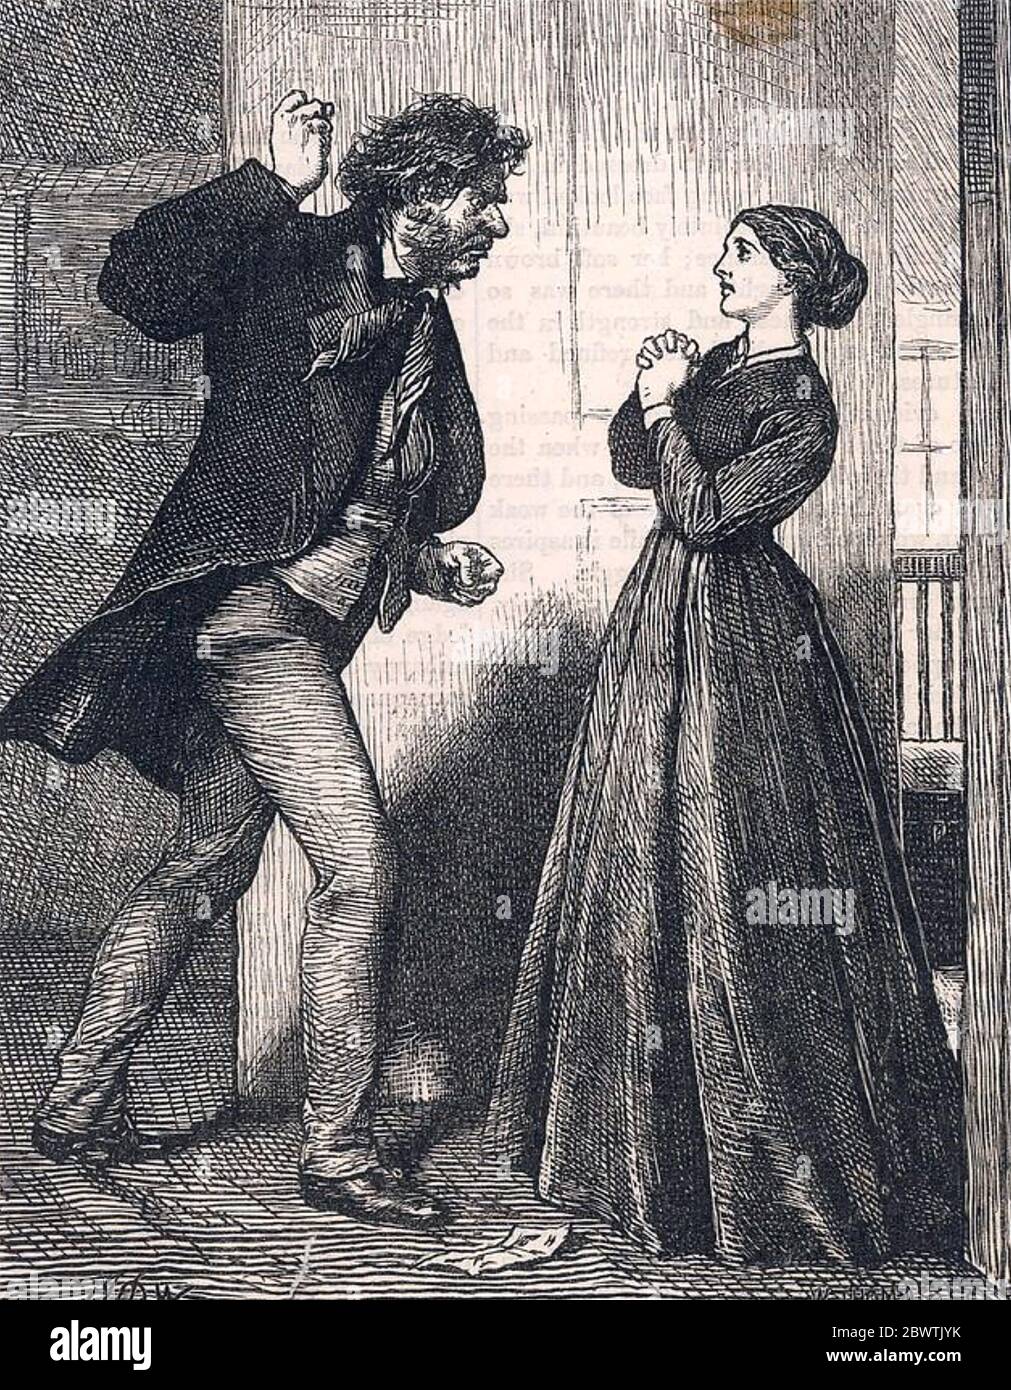 DOMESTIC VIOLENCE as portrayed for a 19th century novel Stock Photo